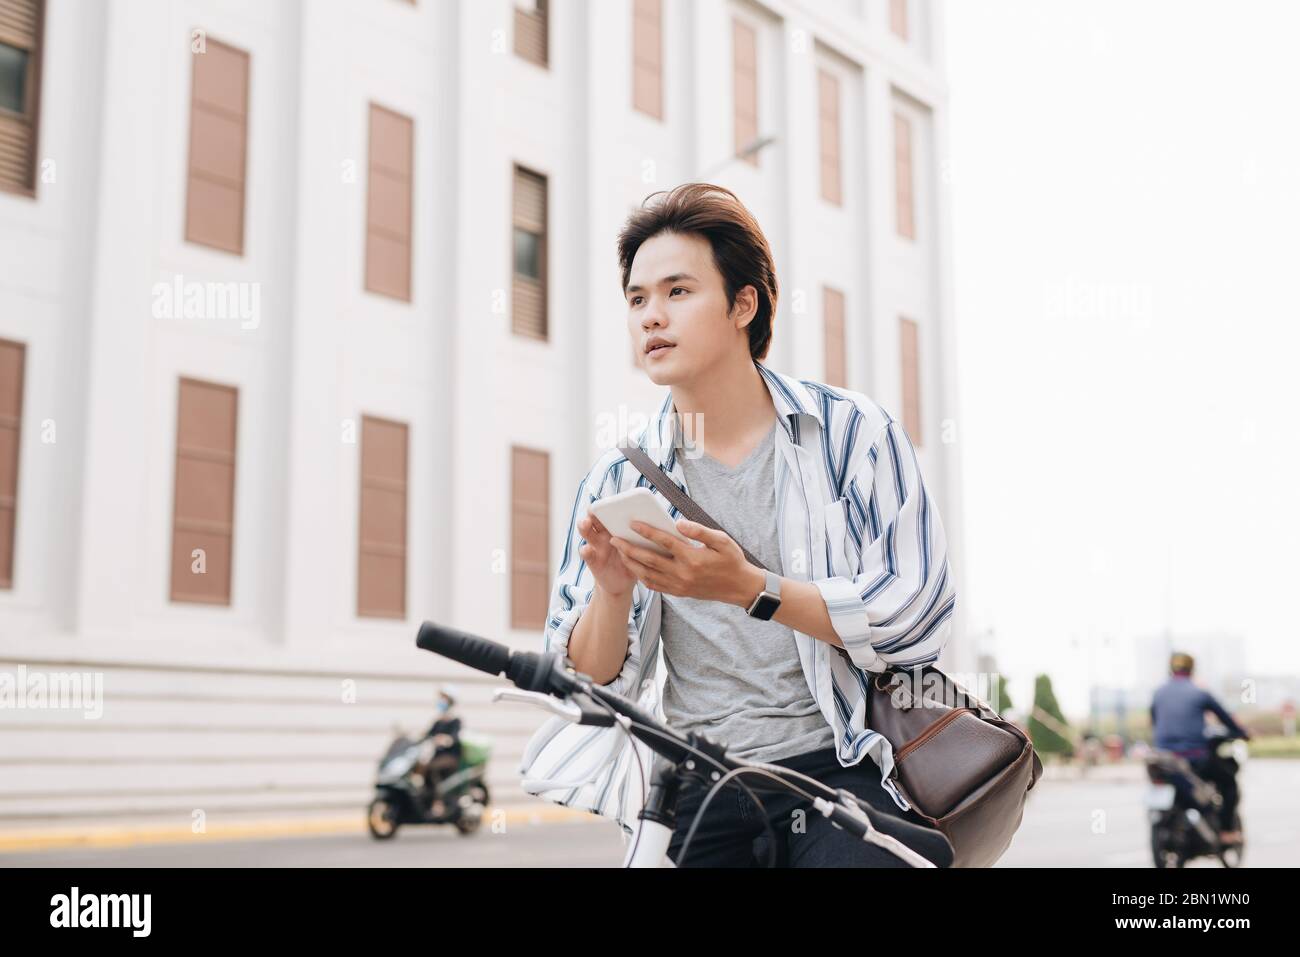 Stylish man chatting while using mobile phone while sitting on bicycle, outdoors. Dressed up in plaid shirt, t-shirt and jeans. Close-up. Stock Photo